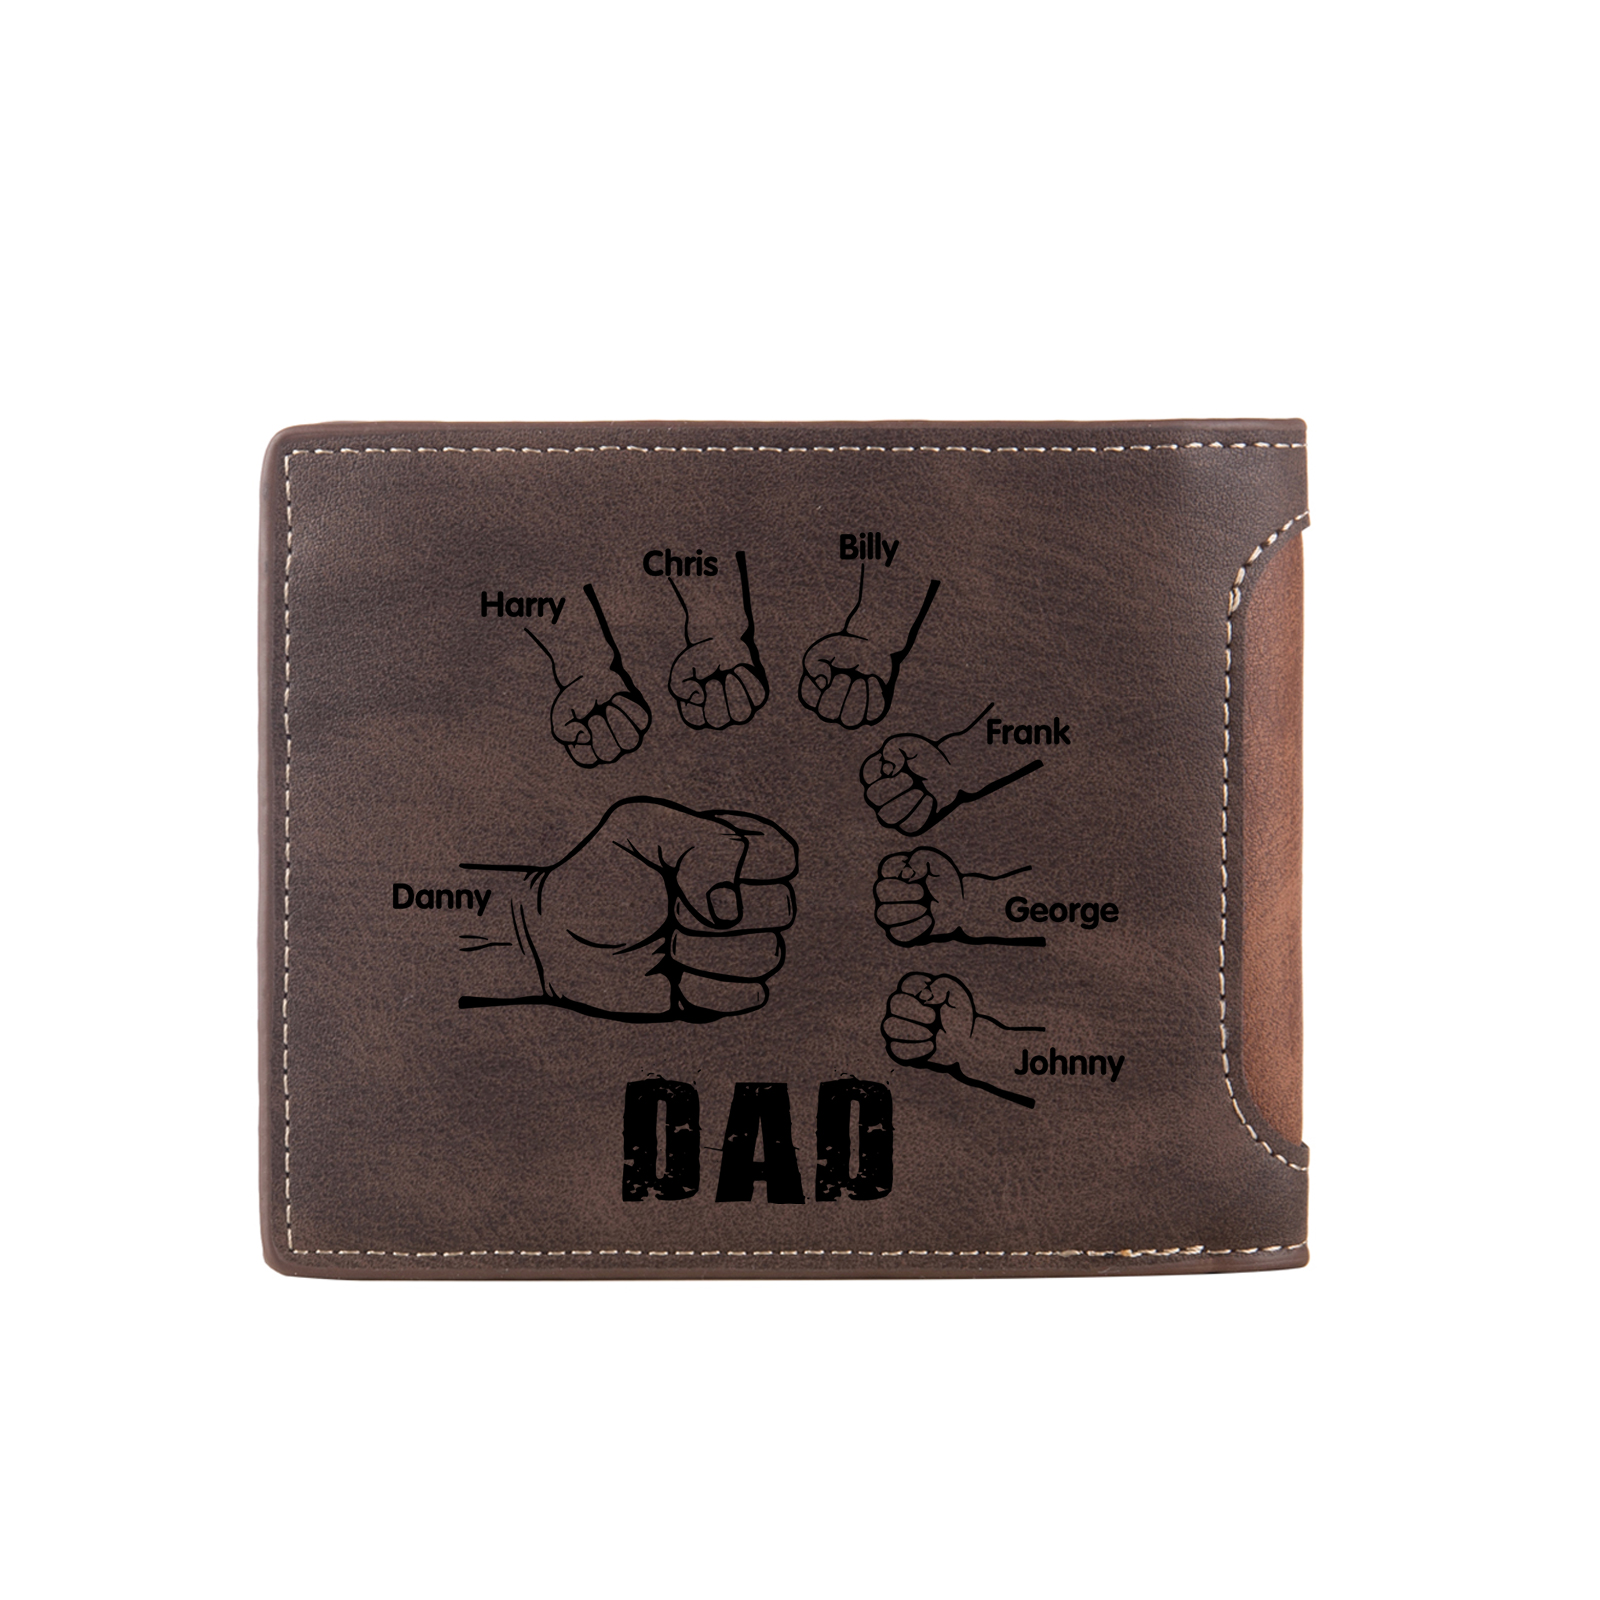 7 Names - Personalized Photo Custom Leather Men's Folding Wallet as a Father's Day Gift for Dad